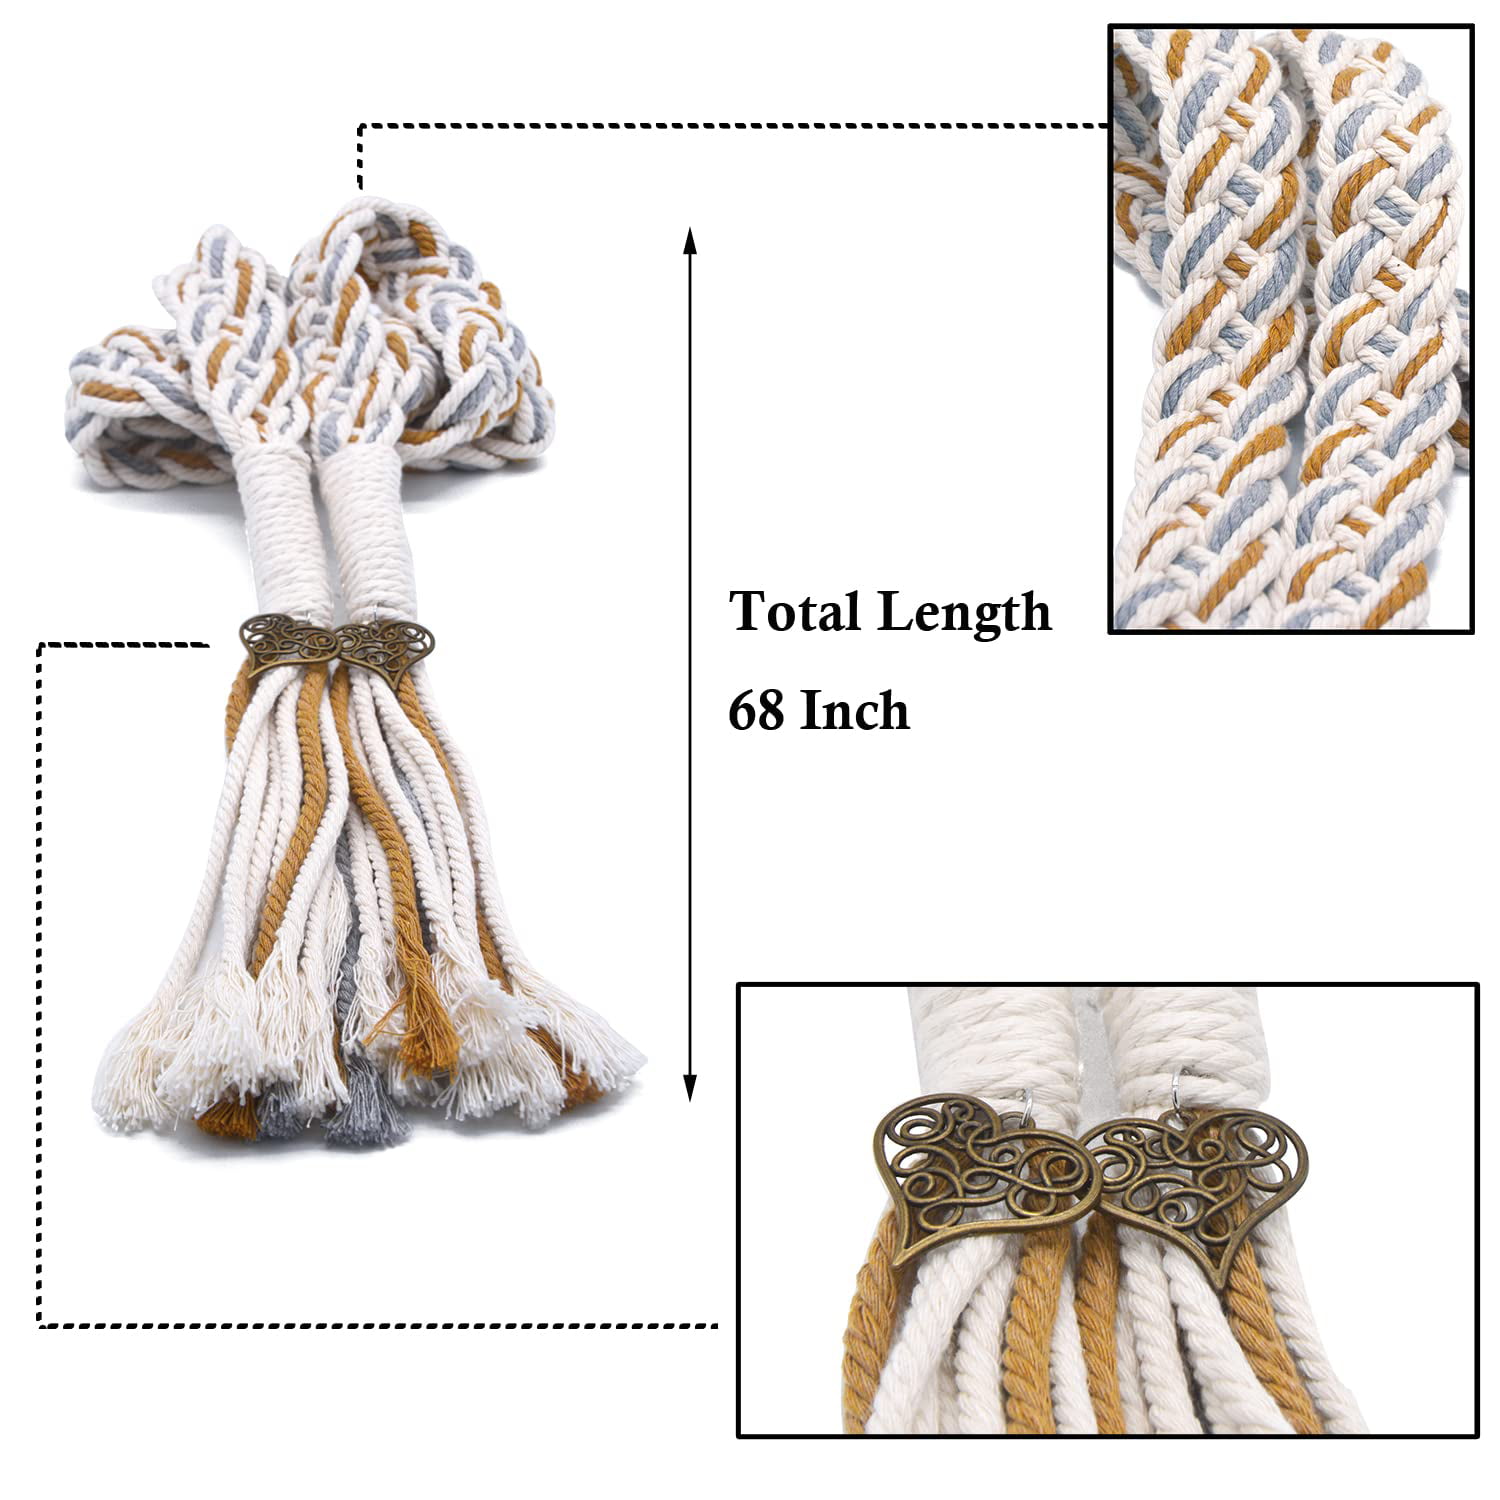 Wedding Lasso Handfasting Cord for Wedding in Natural Cotton Lazos para  Boda Wedding Cord Traditional Celtic Pattern